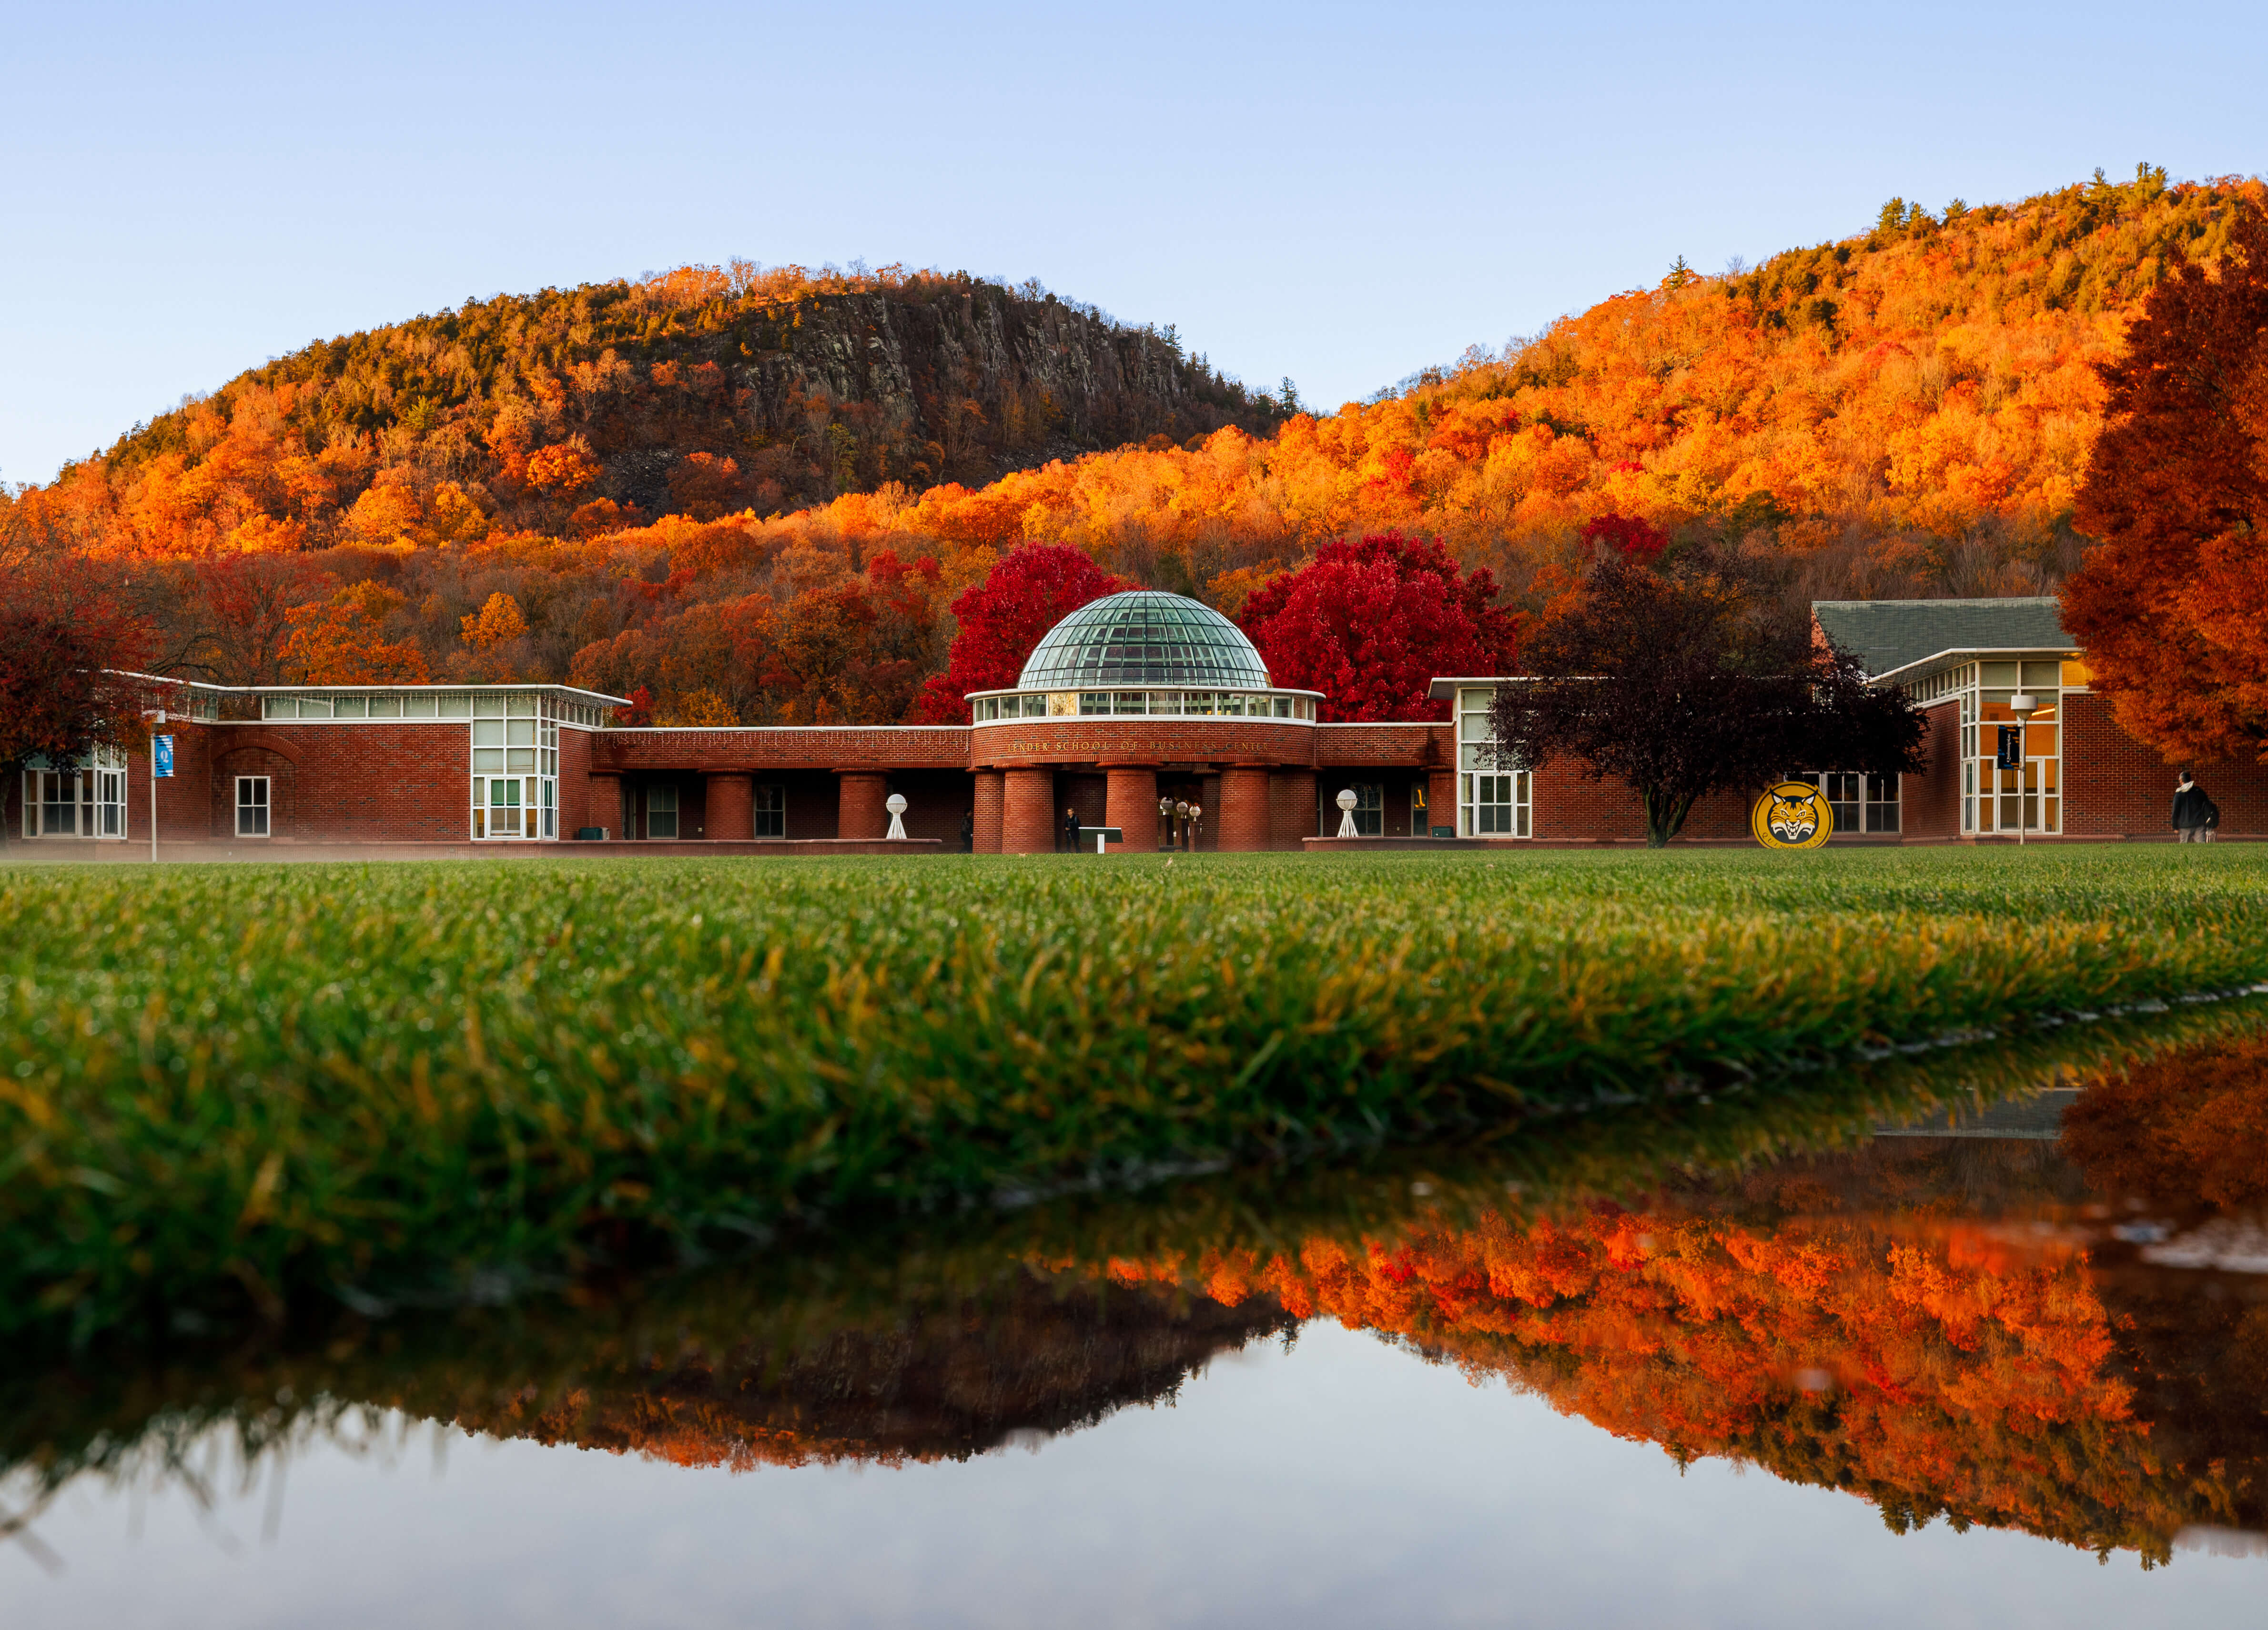 Lender School of Business surrounded by the Fall foliage on the Sleeping Giant.